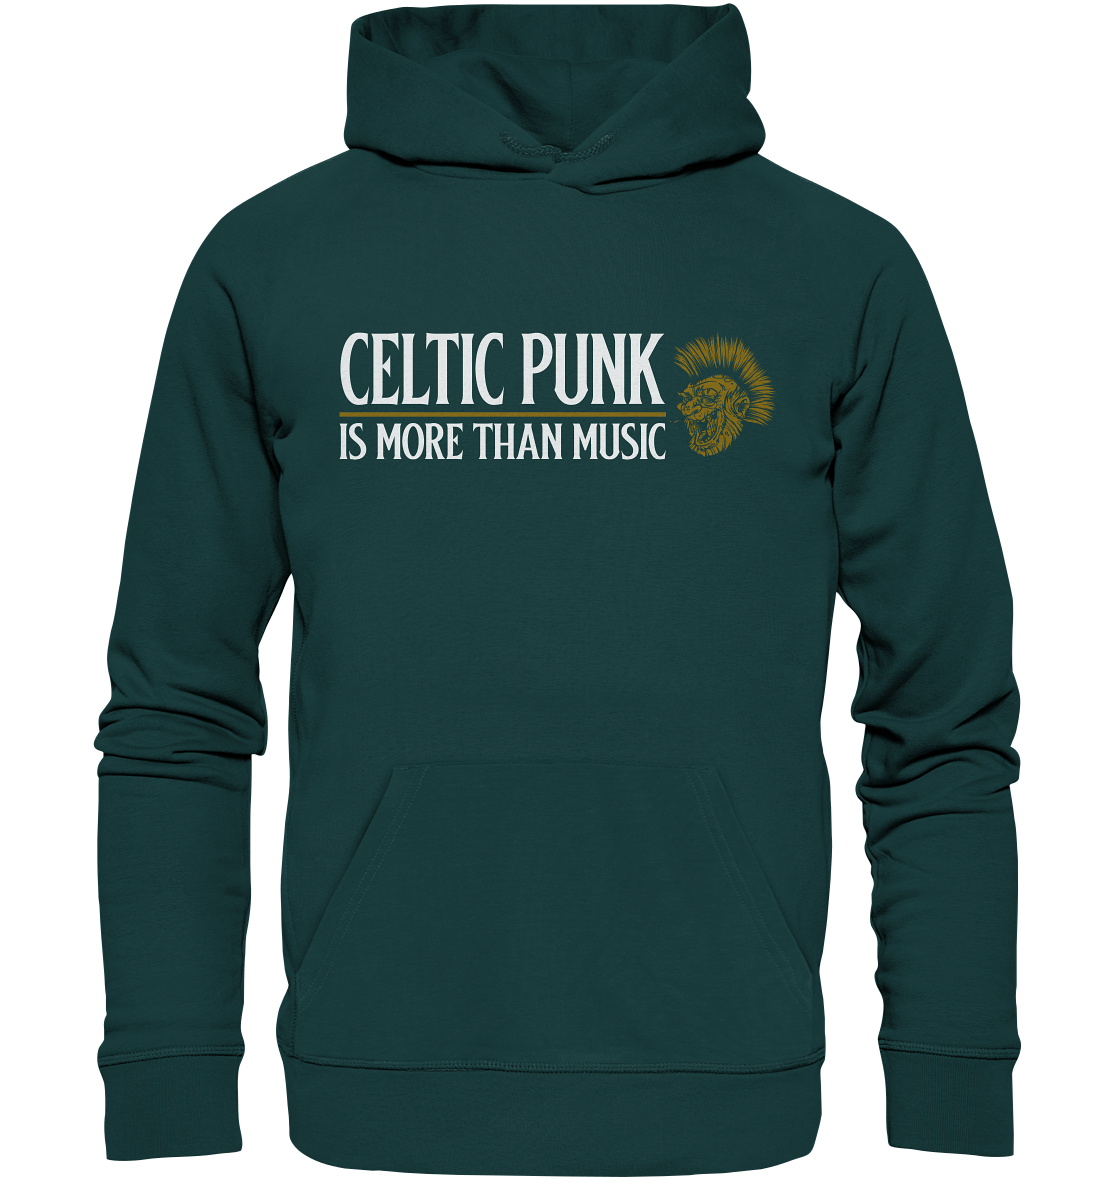 Celtic Punk "Is More Than Music" - Organic Hoodie